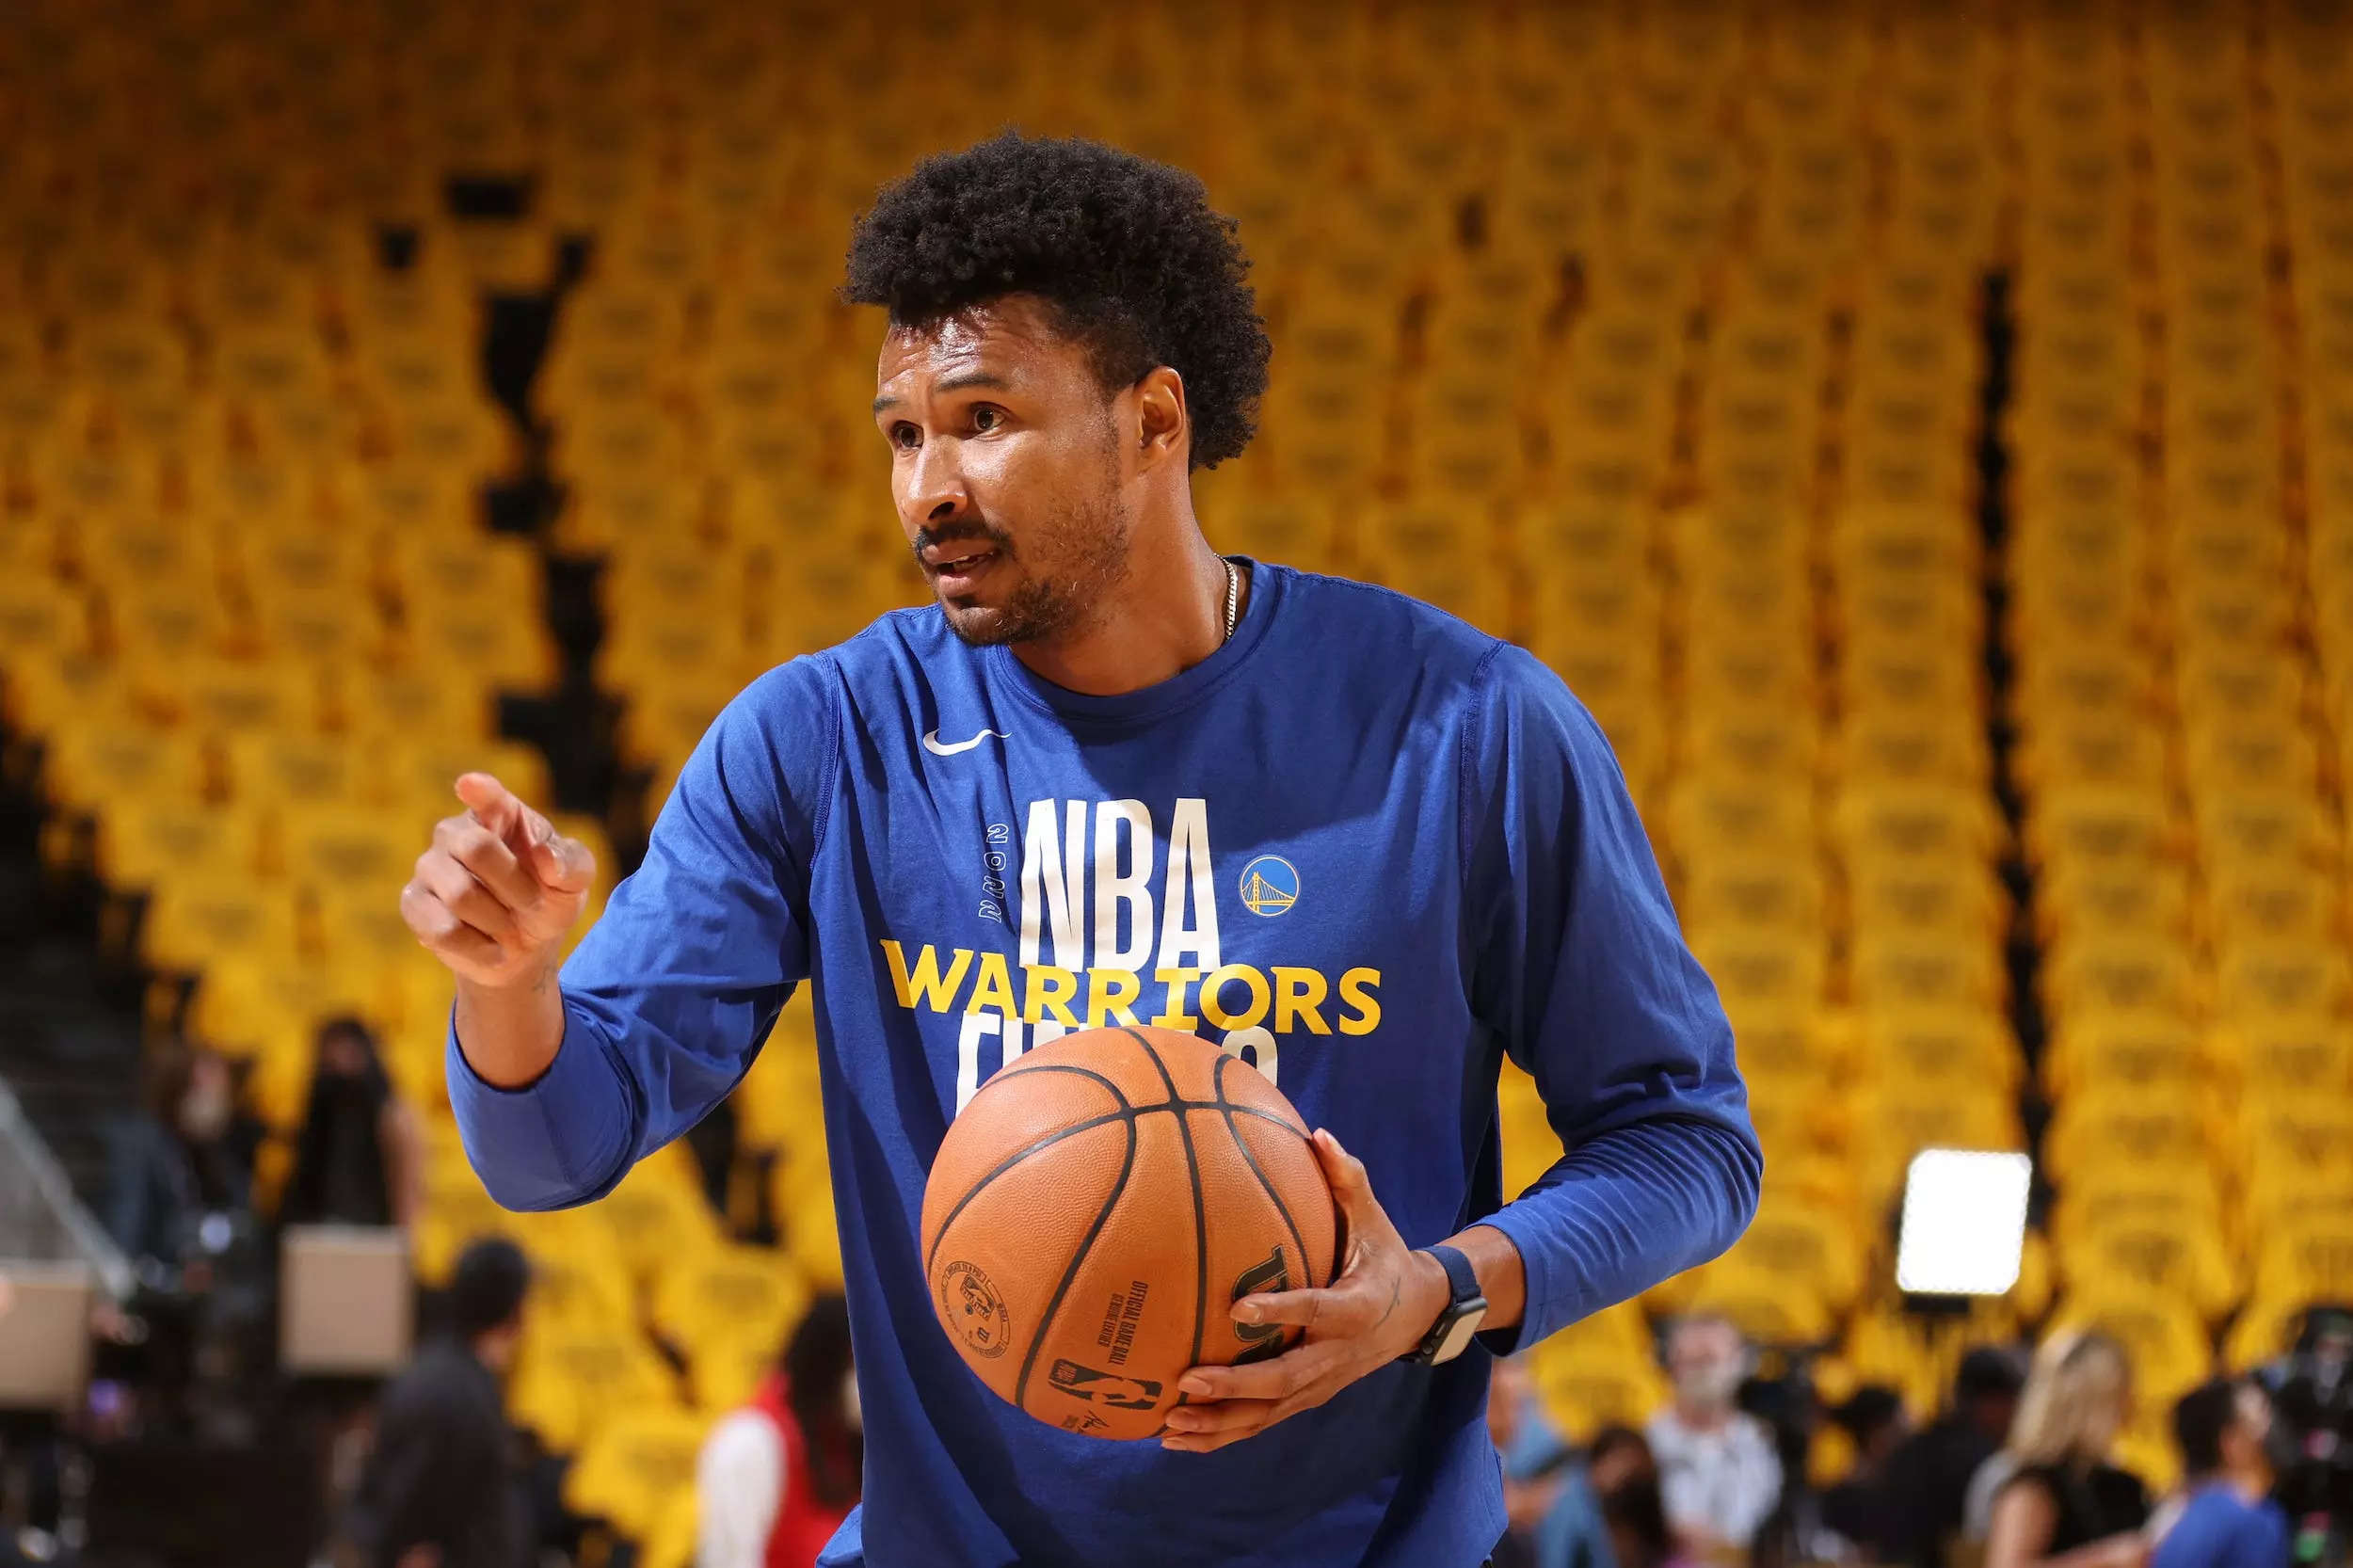 Barbosa, a two-time Warriors champion as a player and coach, has